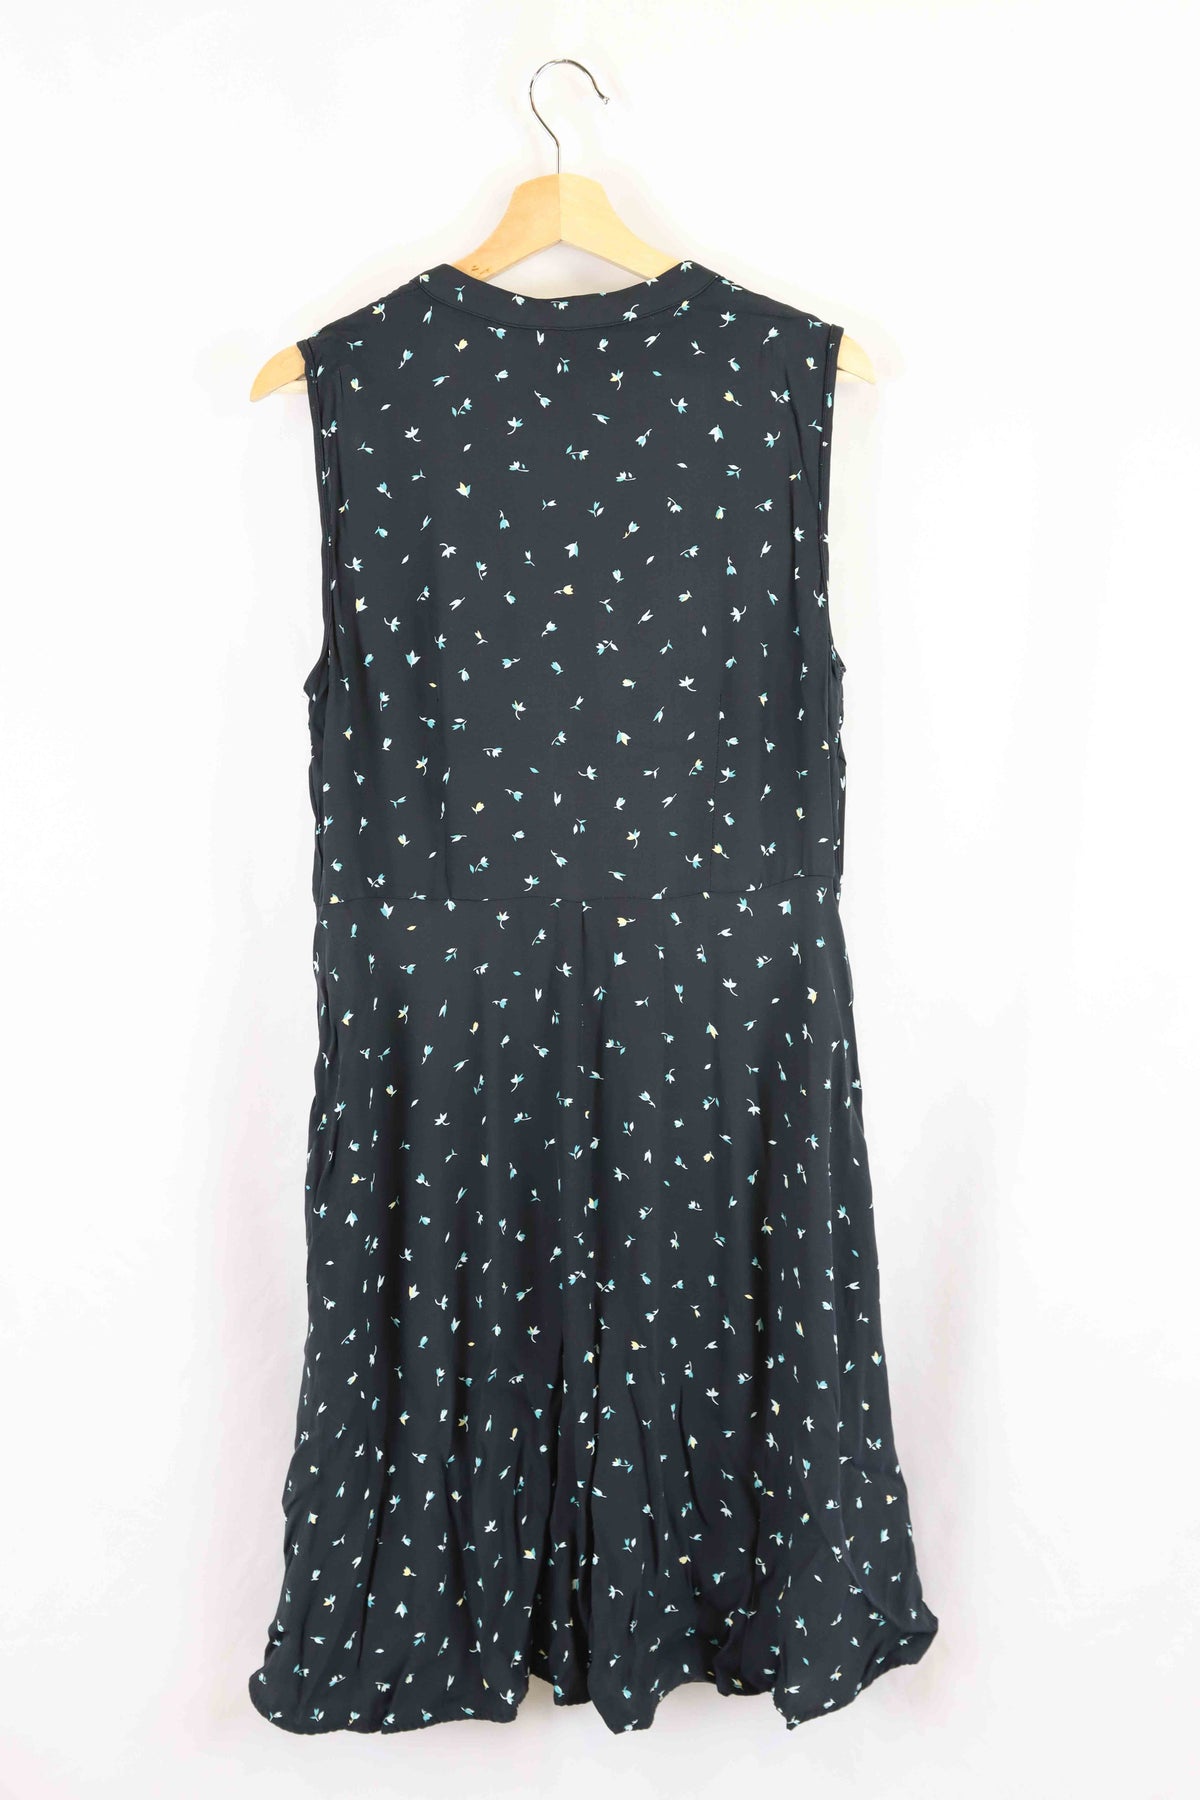 Country Road Black Floral Dress 14